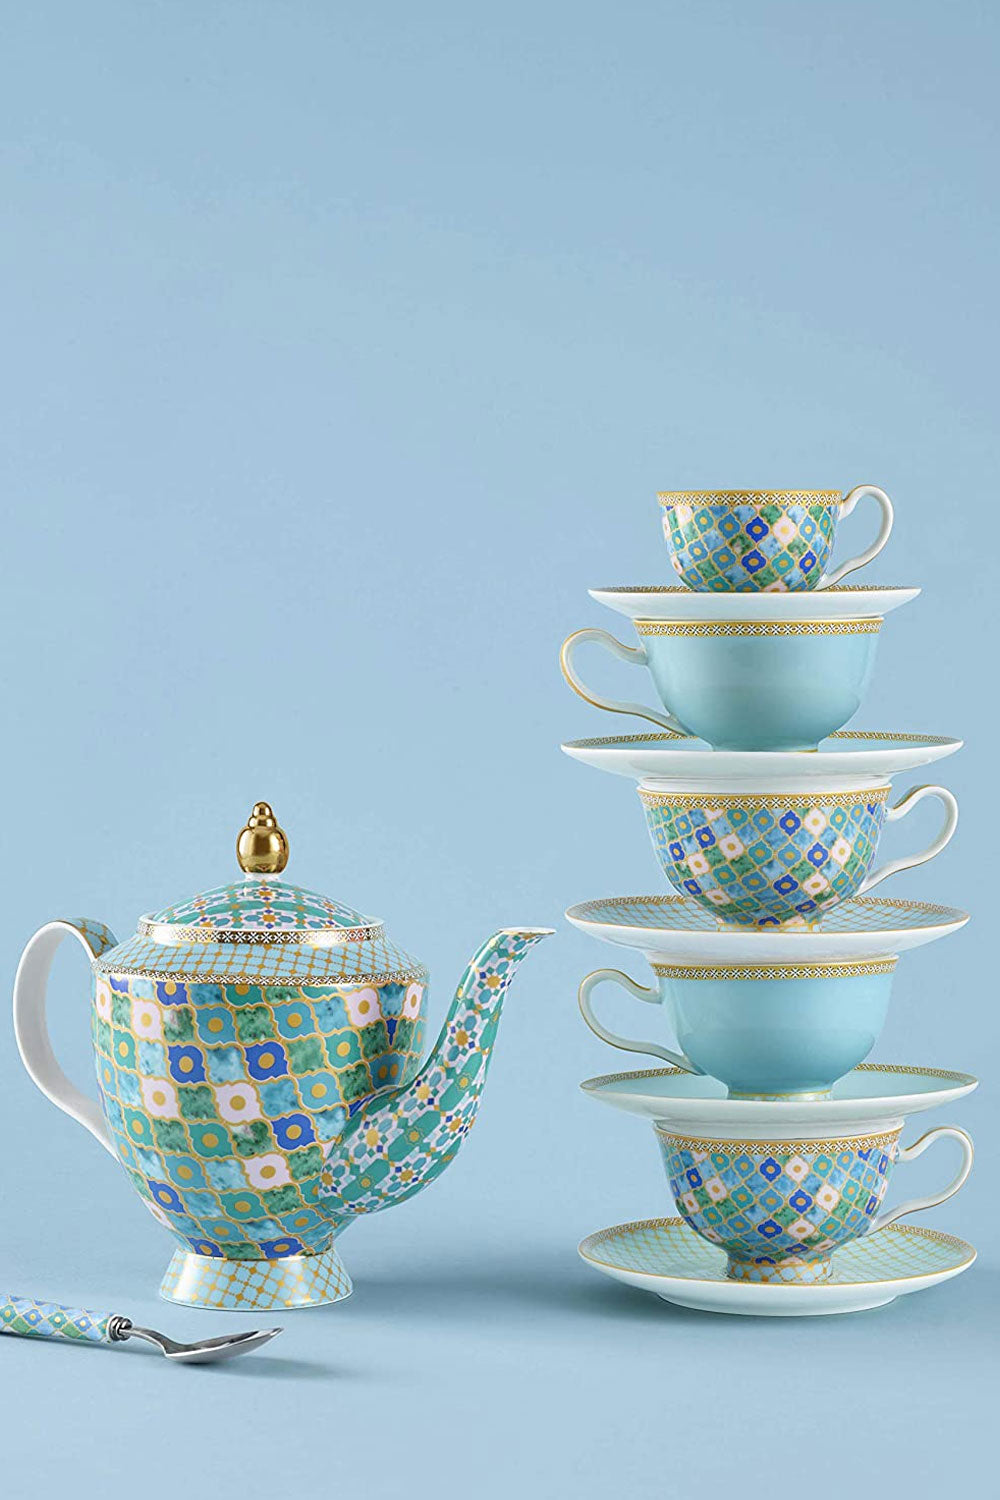 Teas & C'S Kasbah Footed Cup And Saucer, 200 ml - Maison7